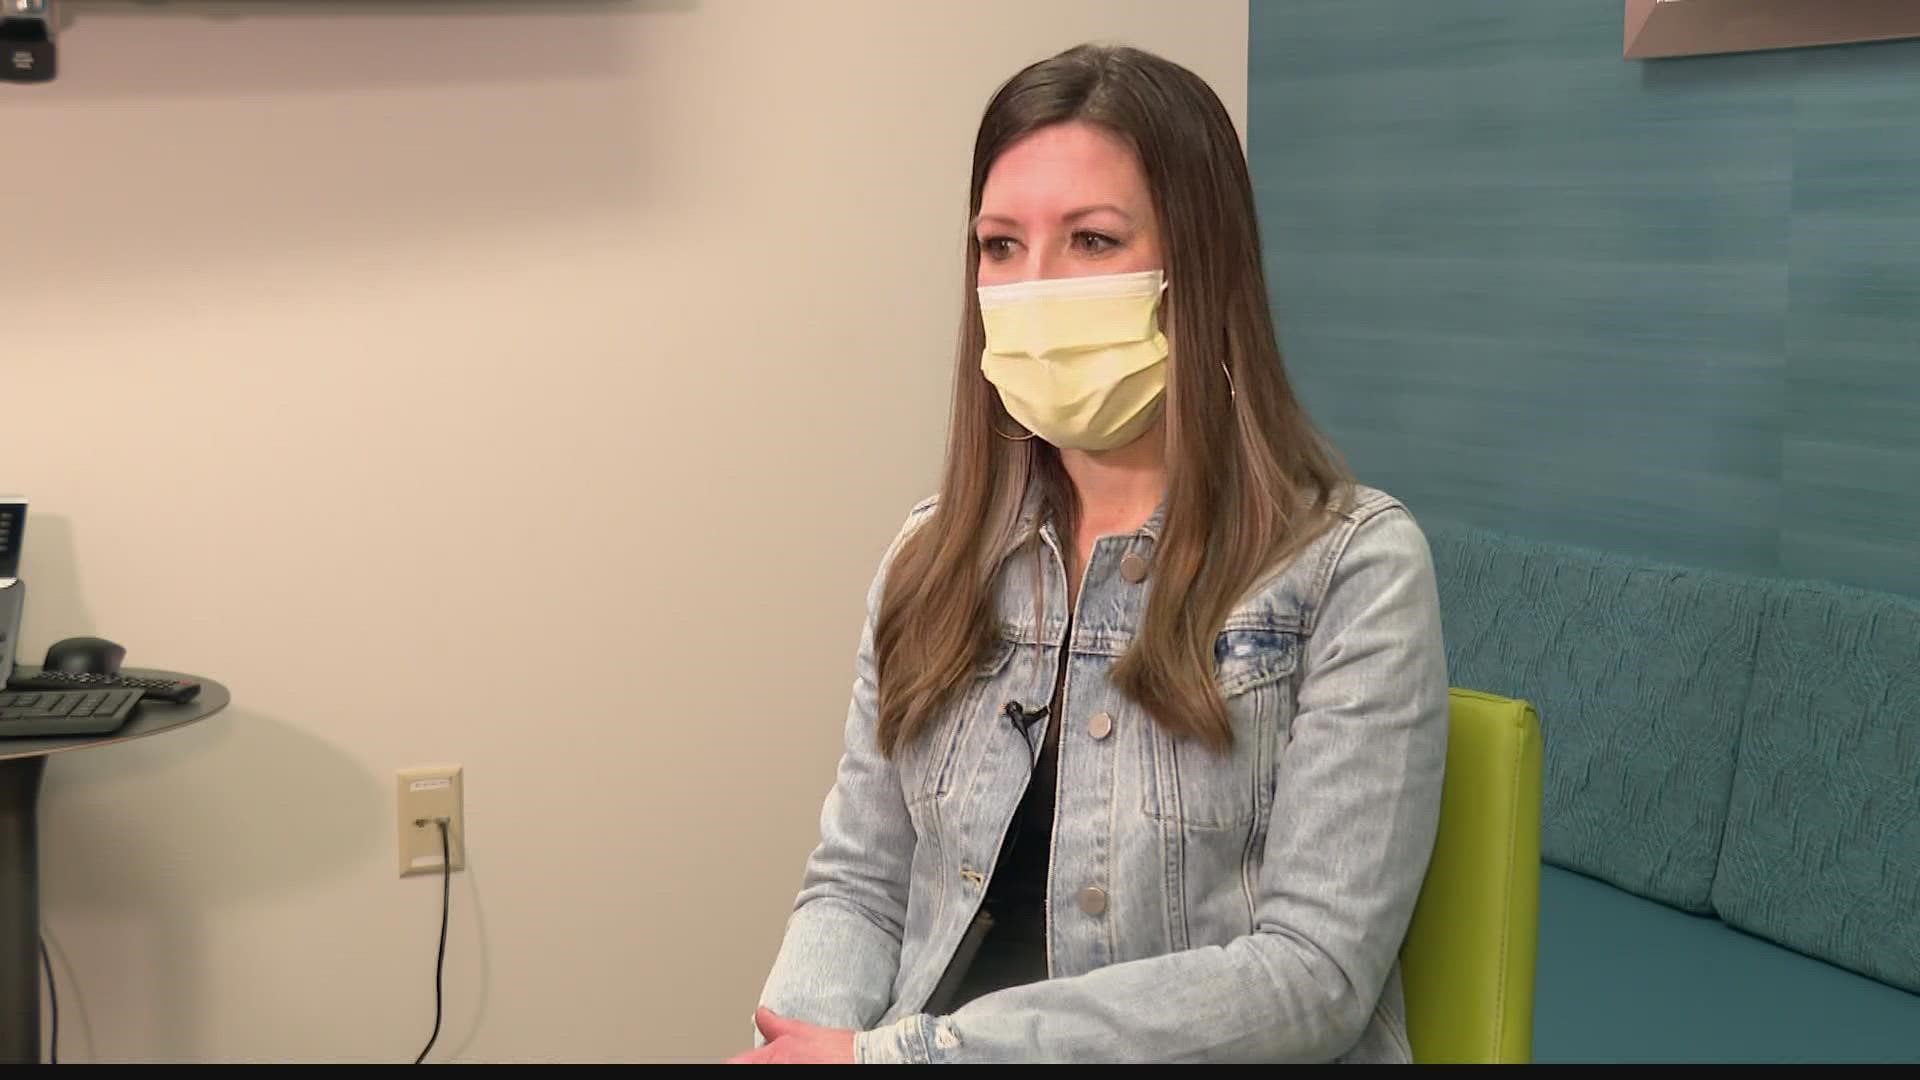 People diagnosed with cancer are at a higher risk of developing heart problems, something Erika Jay's doctors are watching for her.